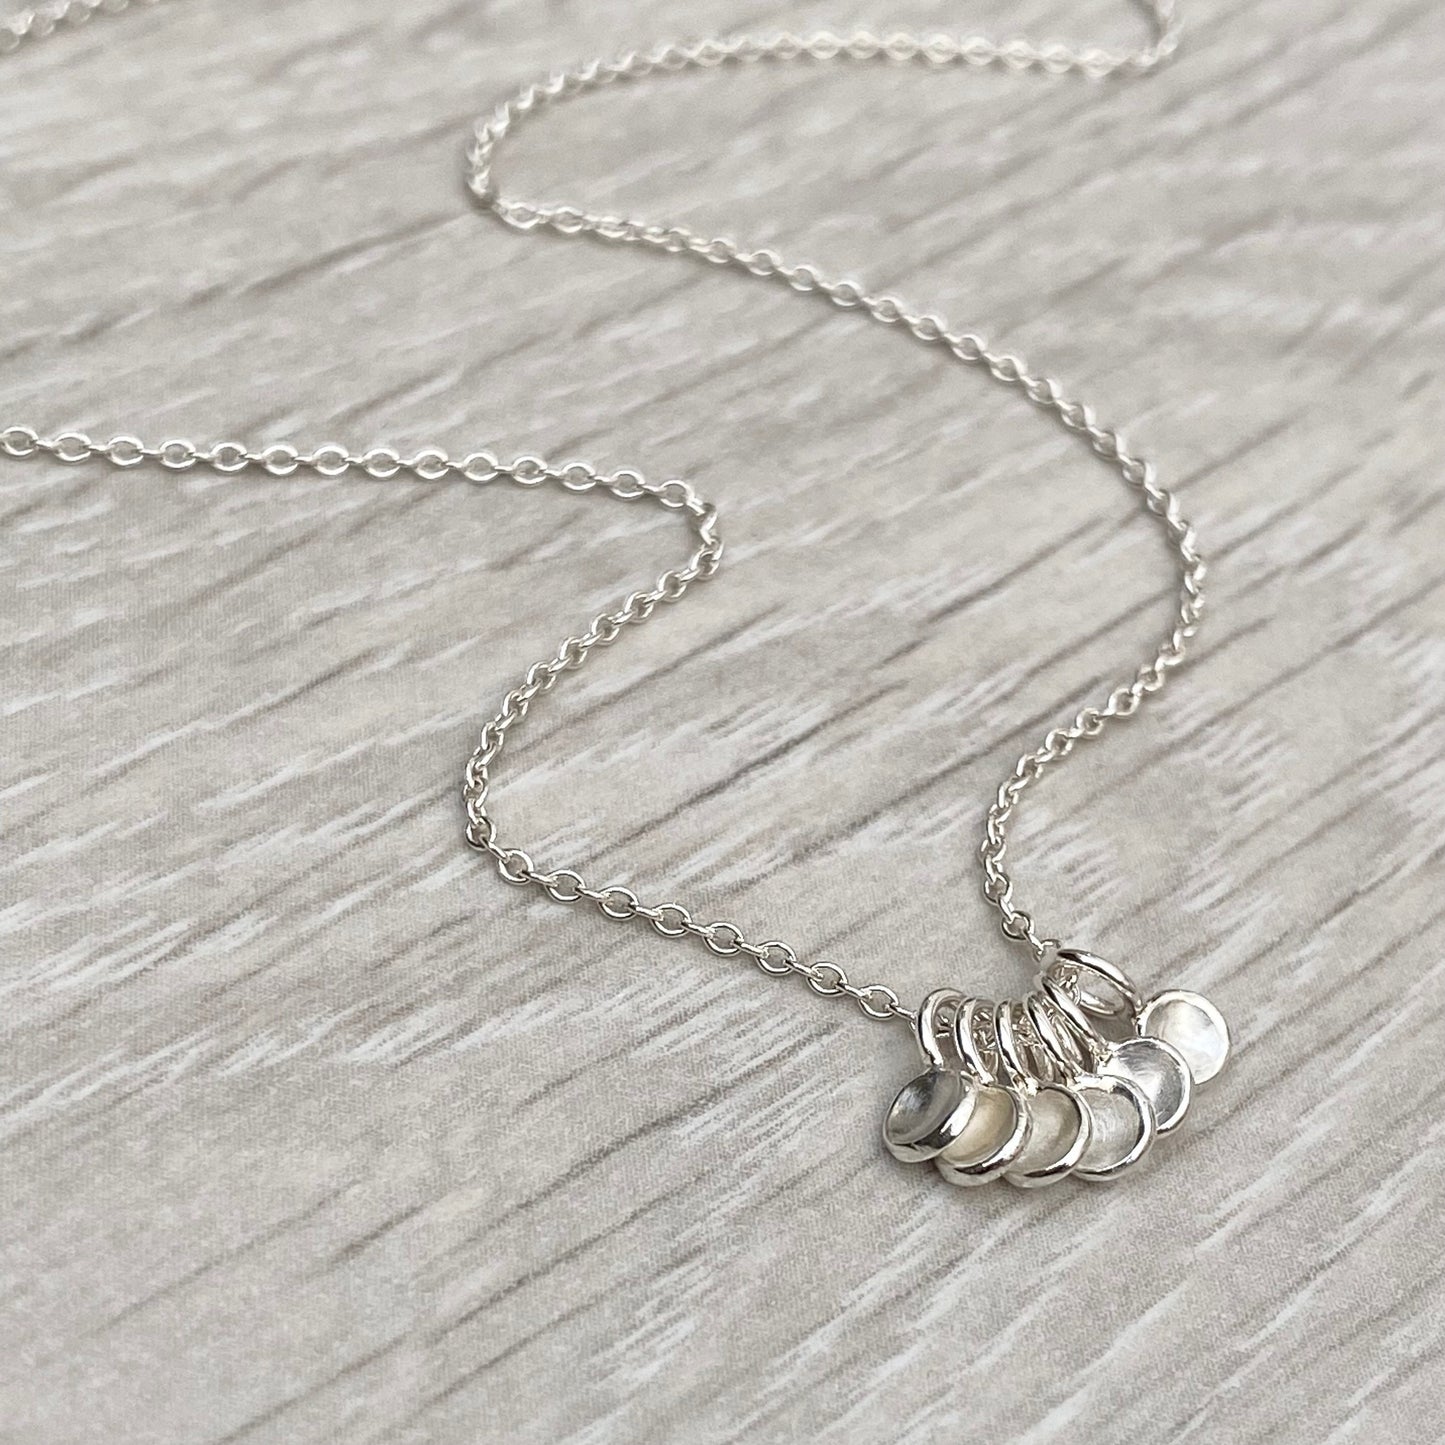 Handmade to order - Solid silver six tiny petal charm pendants on a 1.2mm wide trace chain